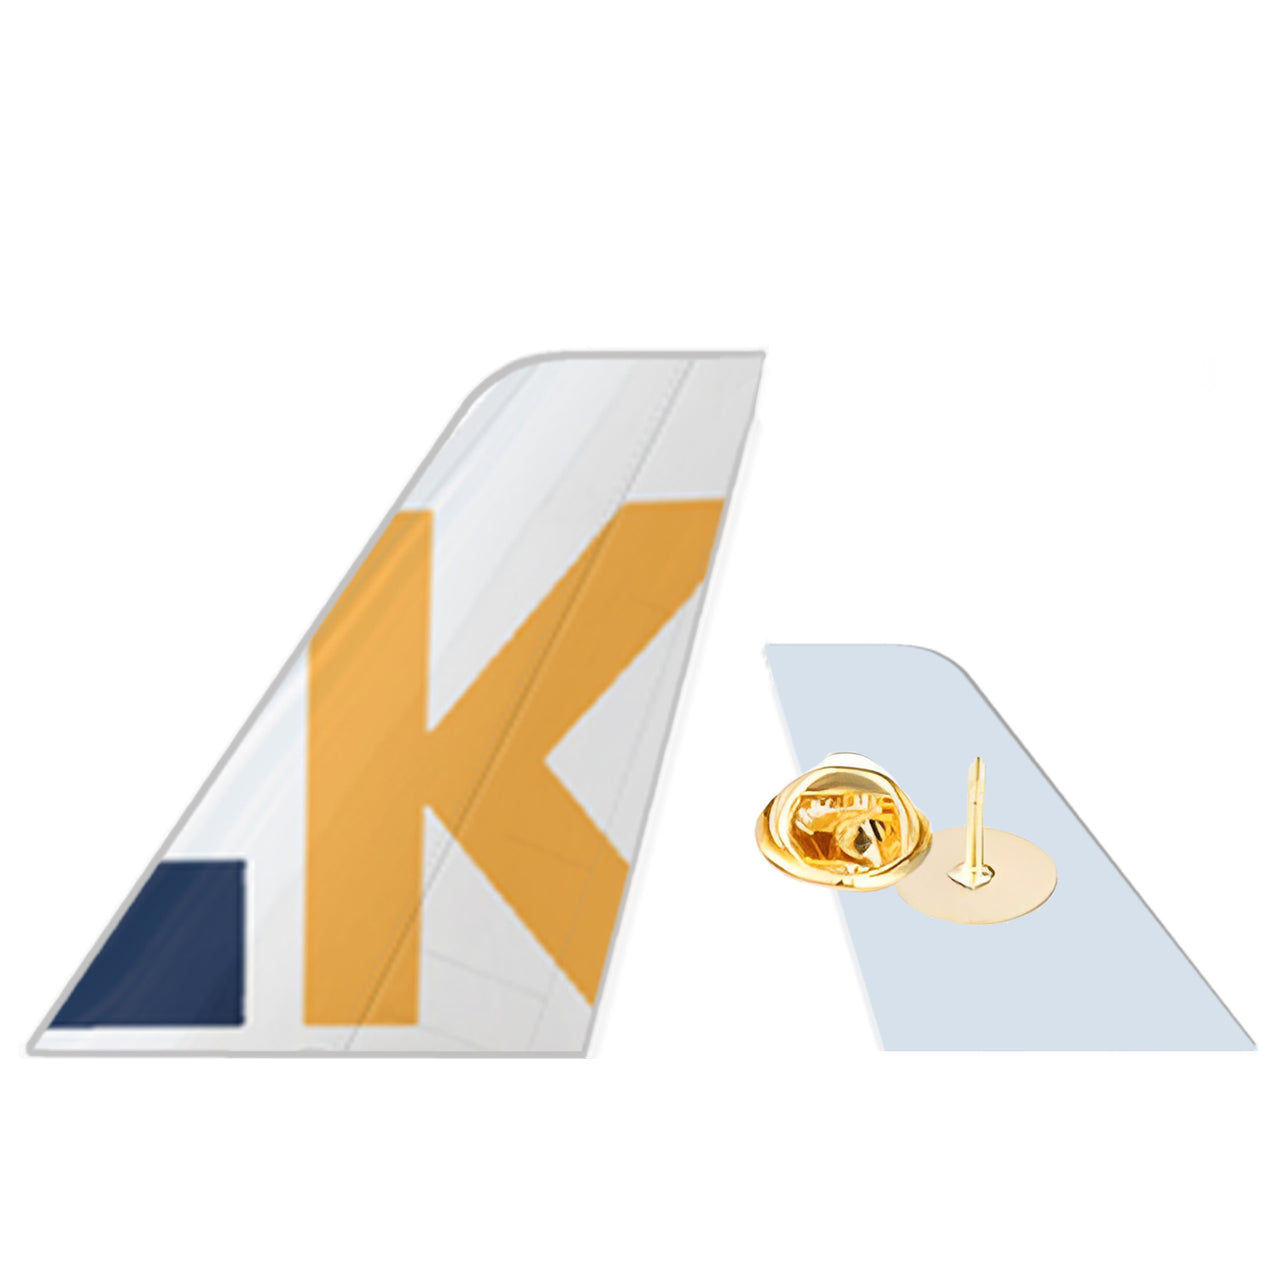 Aero K Airlines Designed Tail Shape Badges & Pins